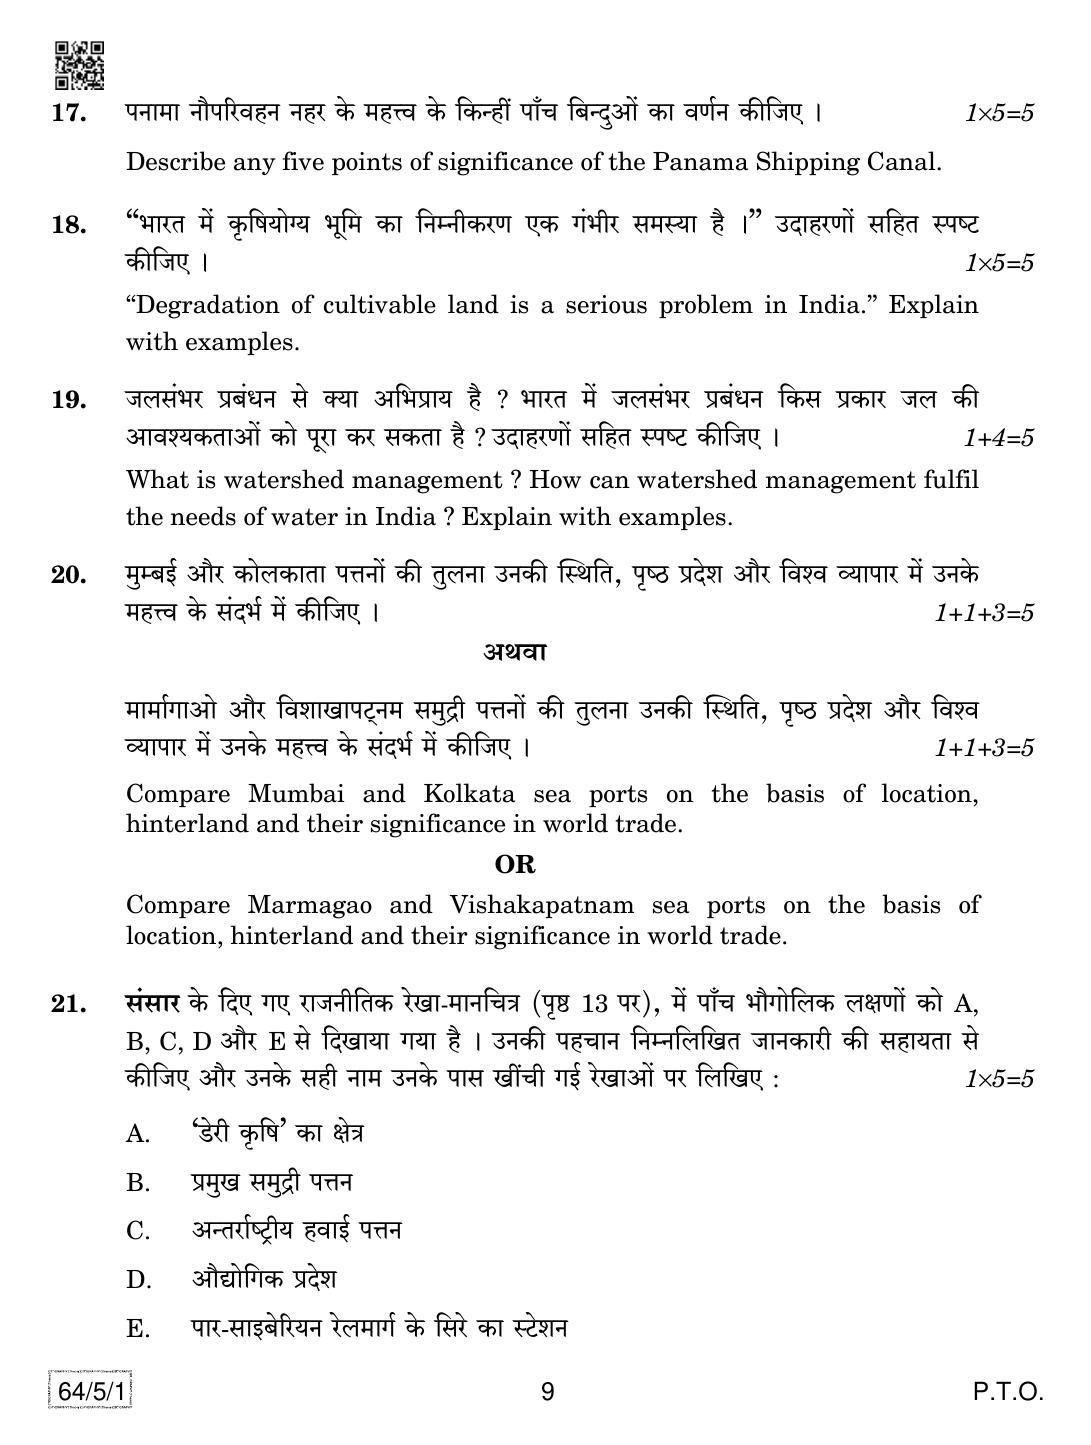 CBSE Class 12 64-5-1 Geography 2019 Question Paper - Page 9